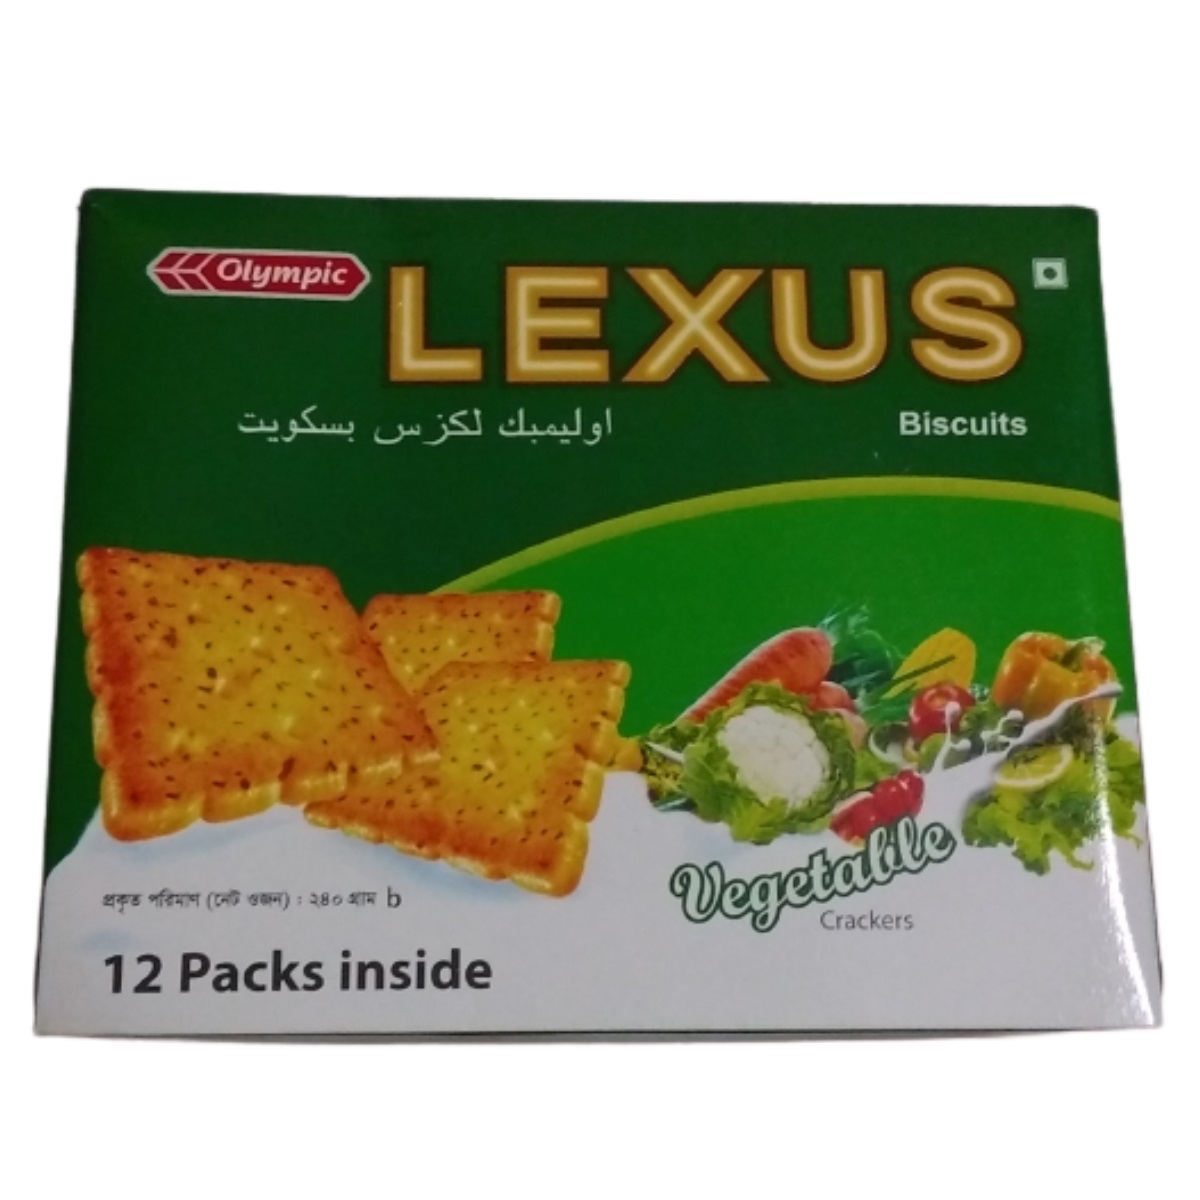 Olympic Lexus Biscuits Vegetable Crackers 240g